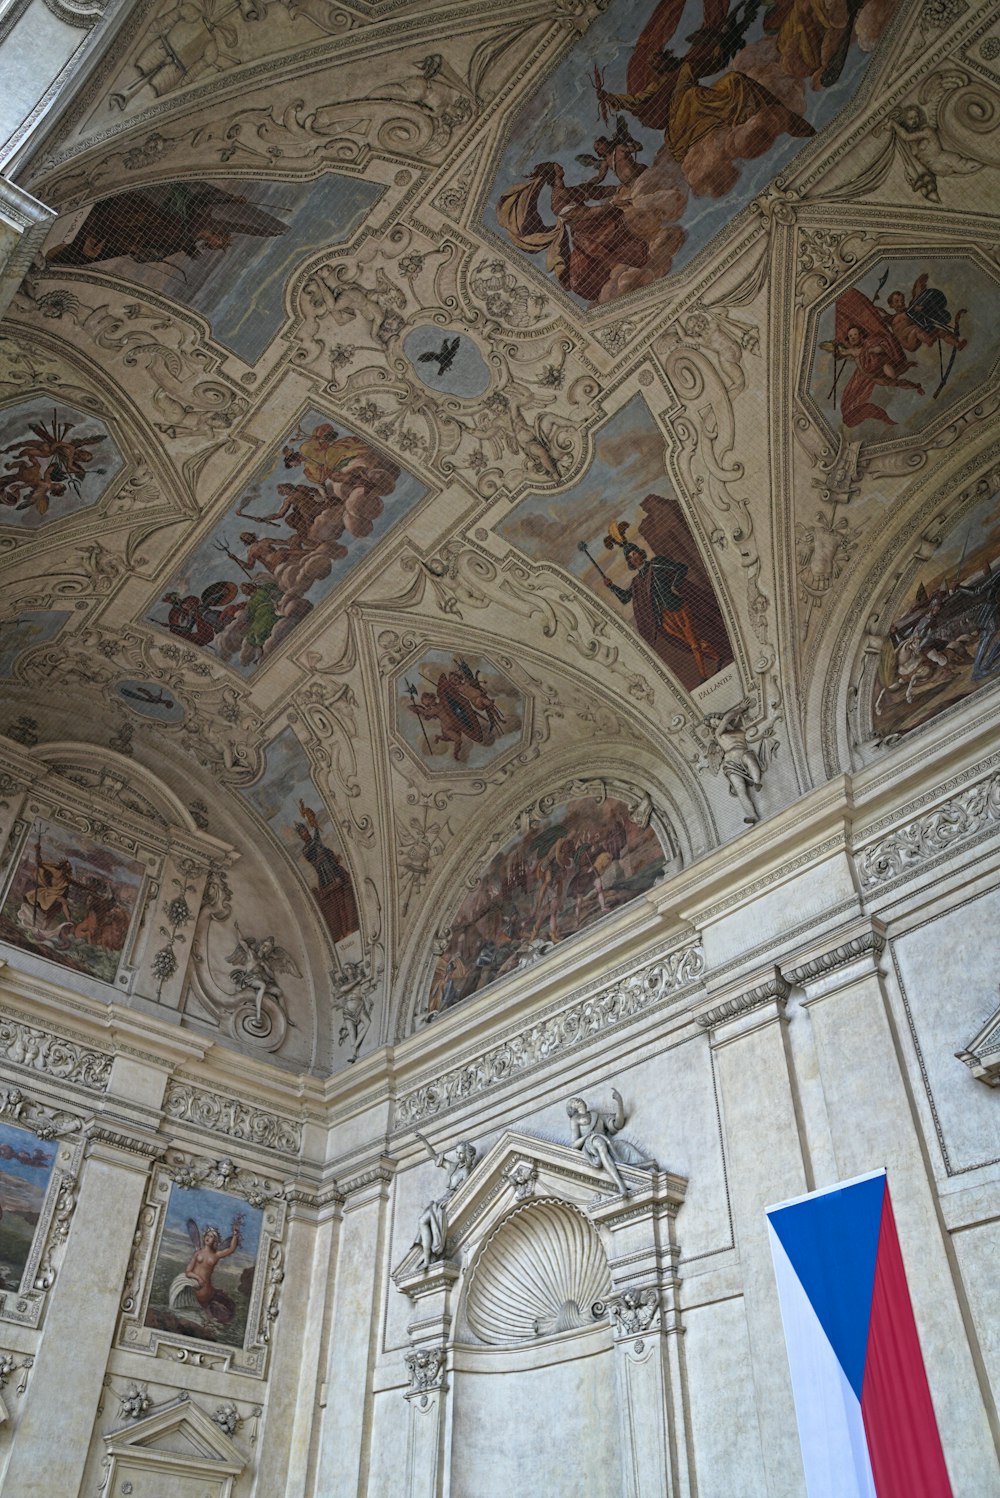 the ceiling of a building with paintings on it